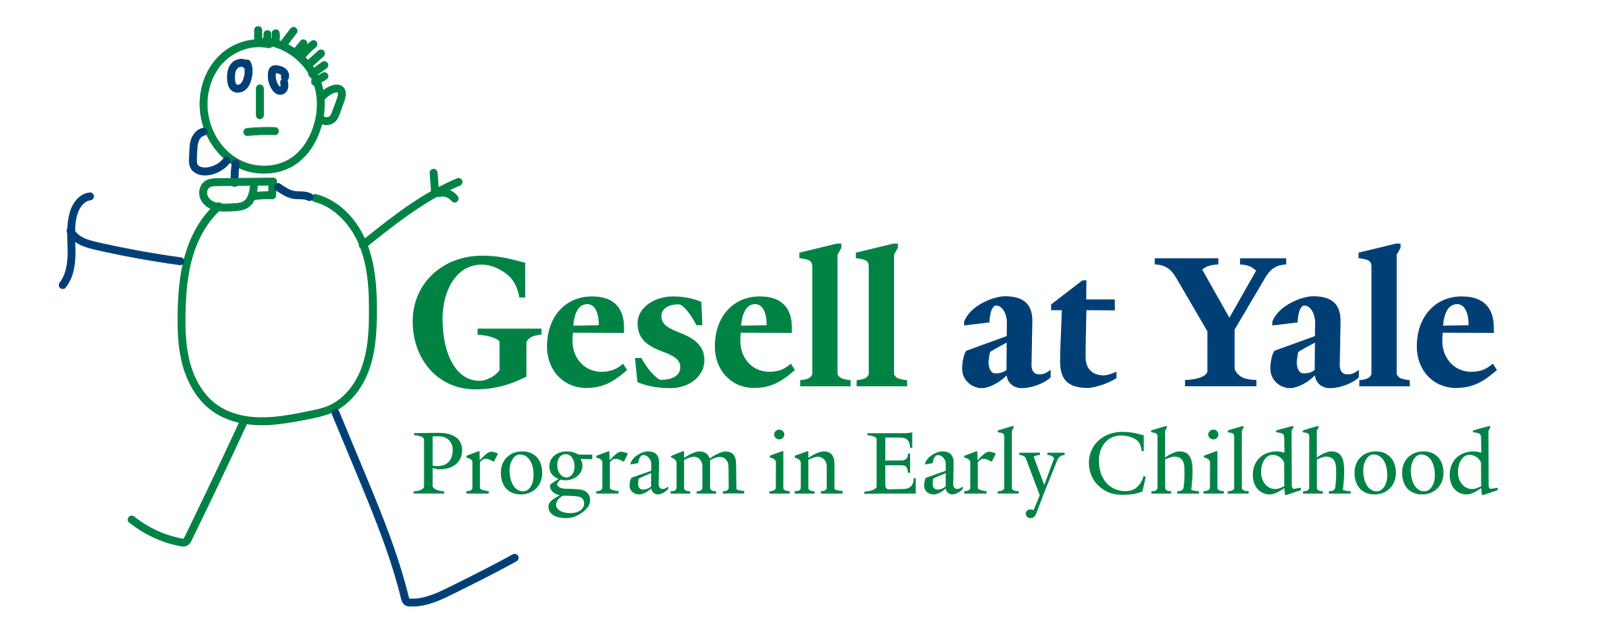 Gesell Program in Early Childhood